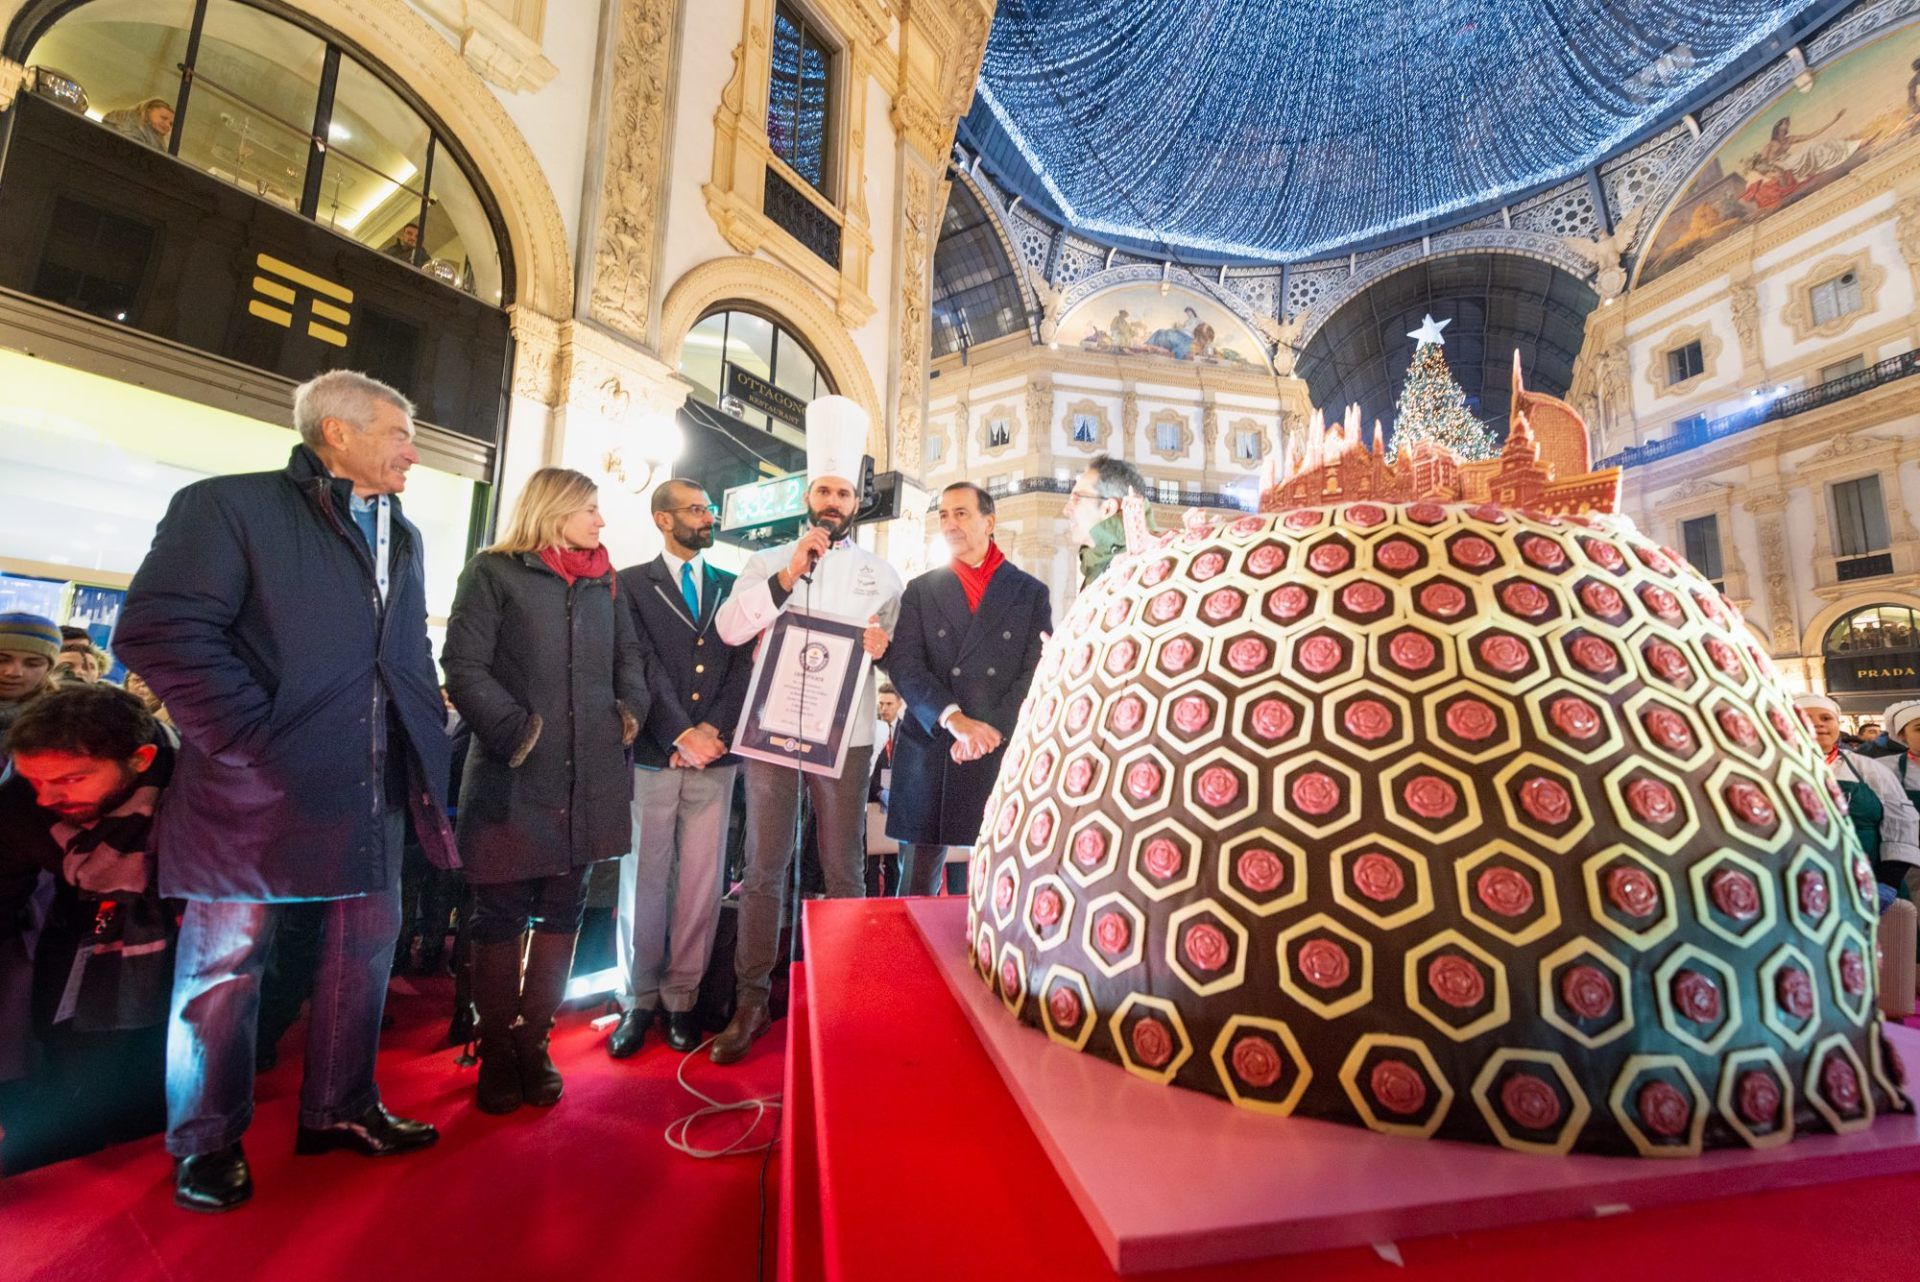 Largest panettone: The Chocolate Academy Center in Milan